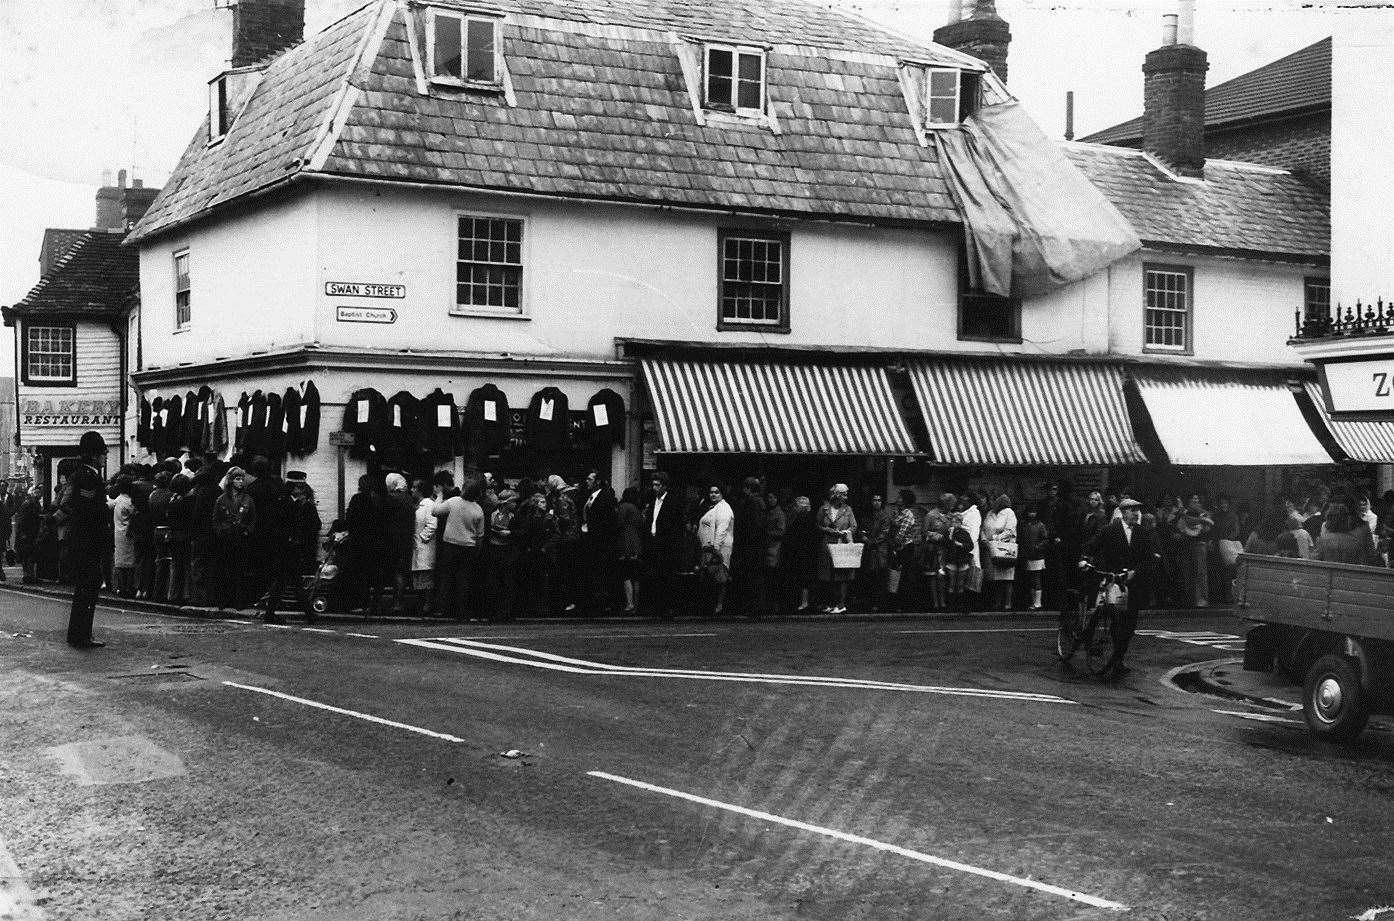 Shoppers queue up to get into Baldocks outdoor clothing shop when it reopened following a fire in the 1970s. Image submitted by Johnny Eastwood